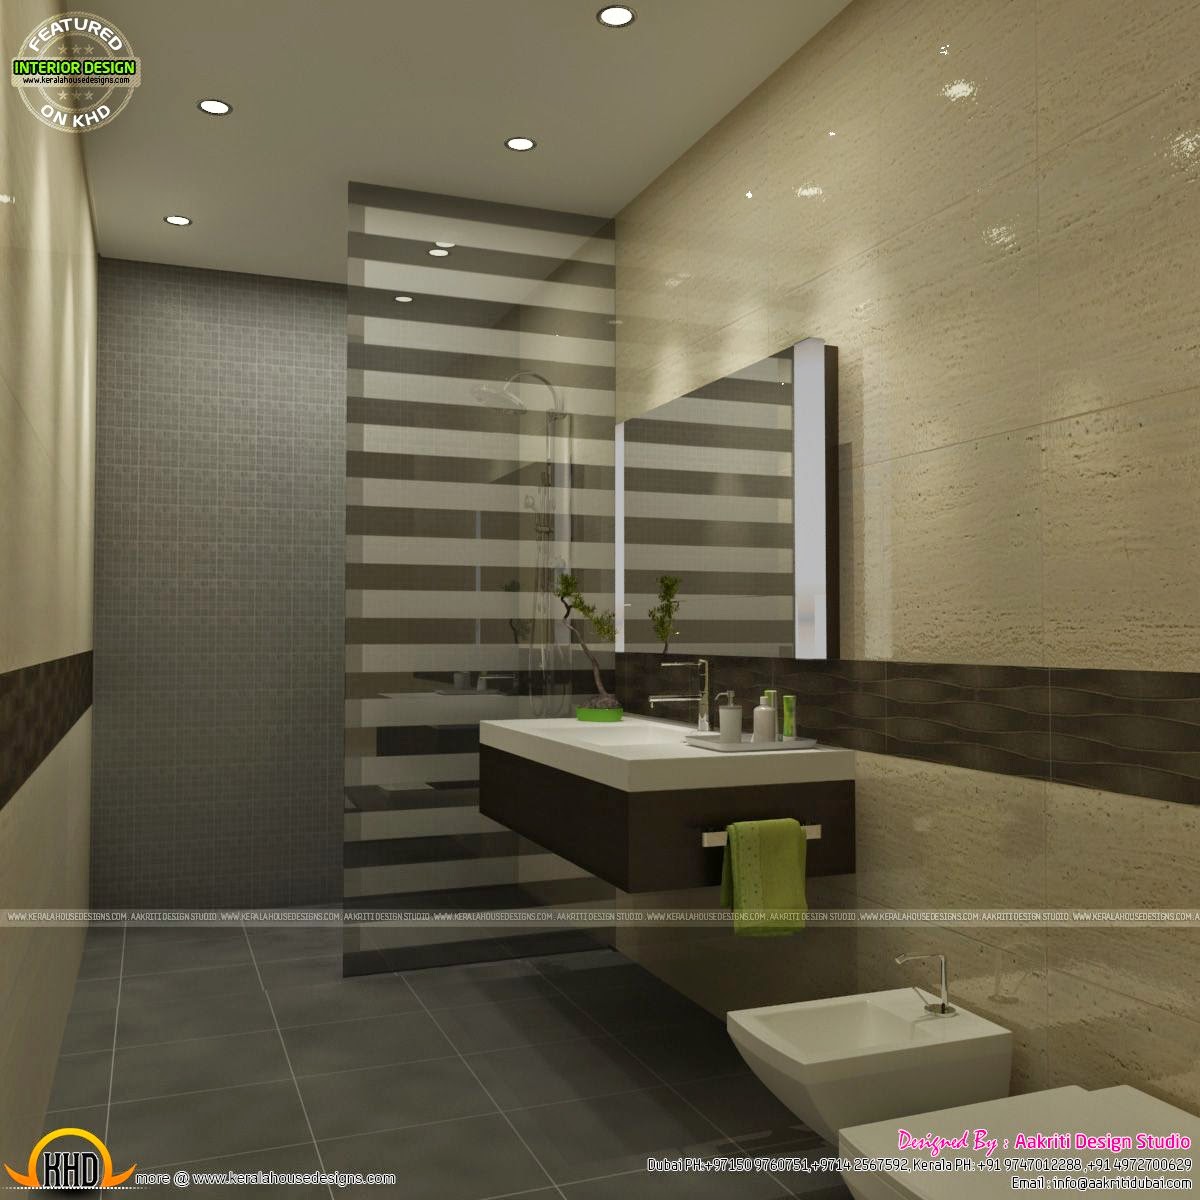 Awesome interiors of Living, Kitchen and bathroom - Kerala ...